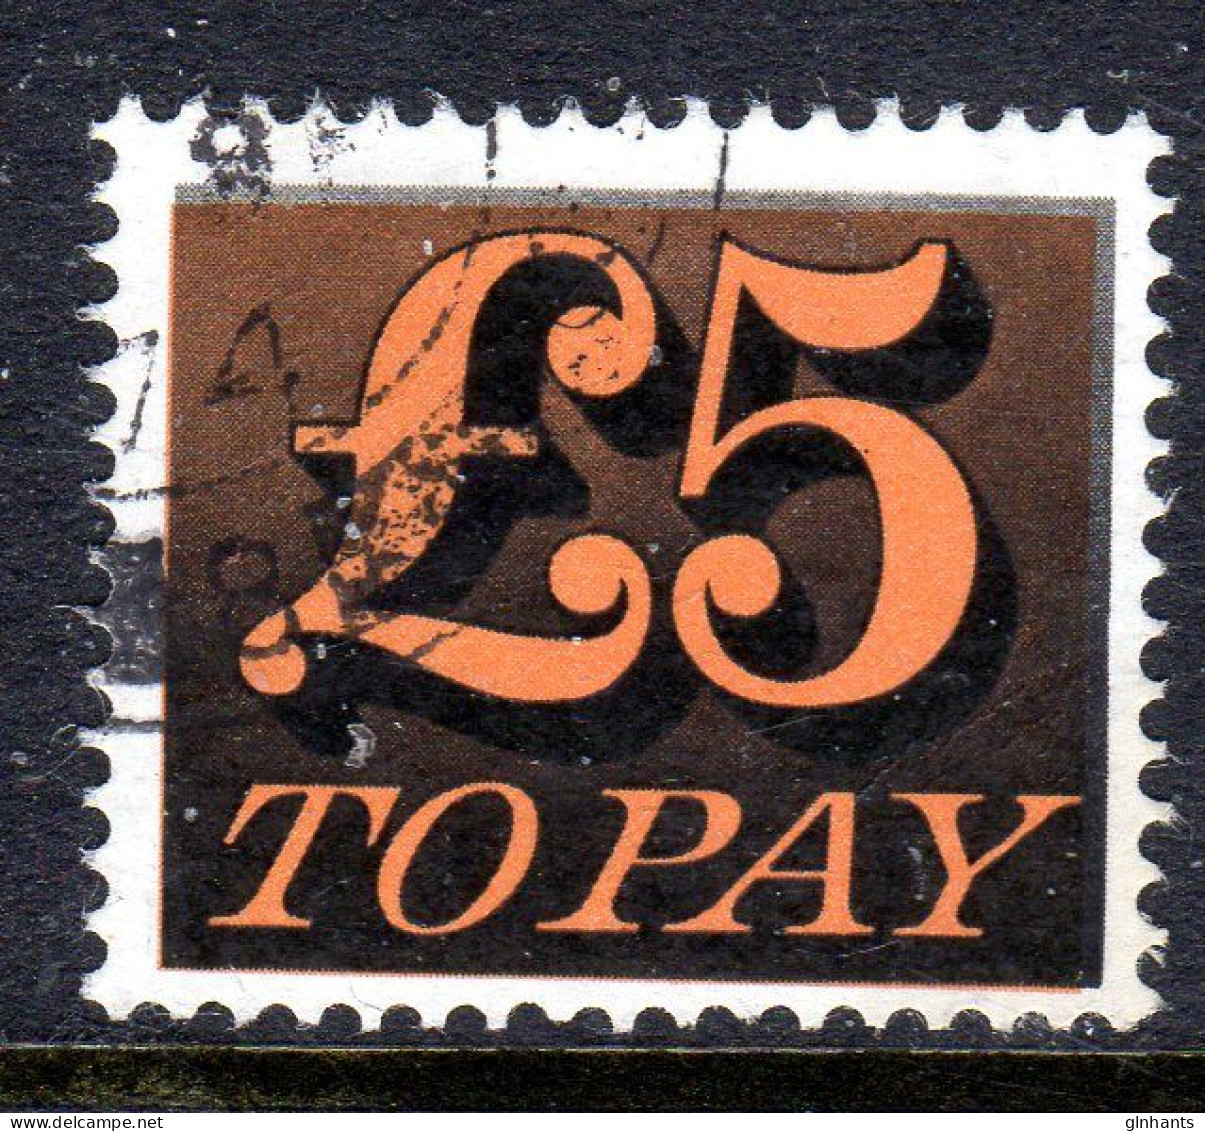 GREAT BRITAIN GB - 1970 POSTAGE DUE £5 STAMP FINE USED SG D89 - Strafportzegels